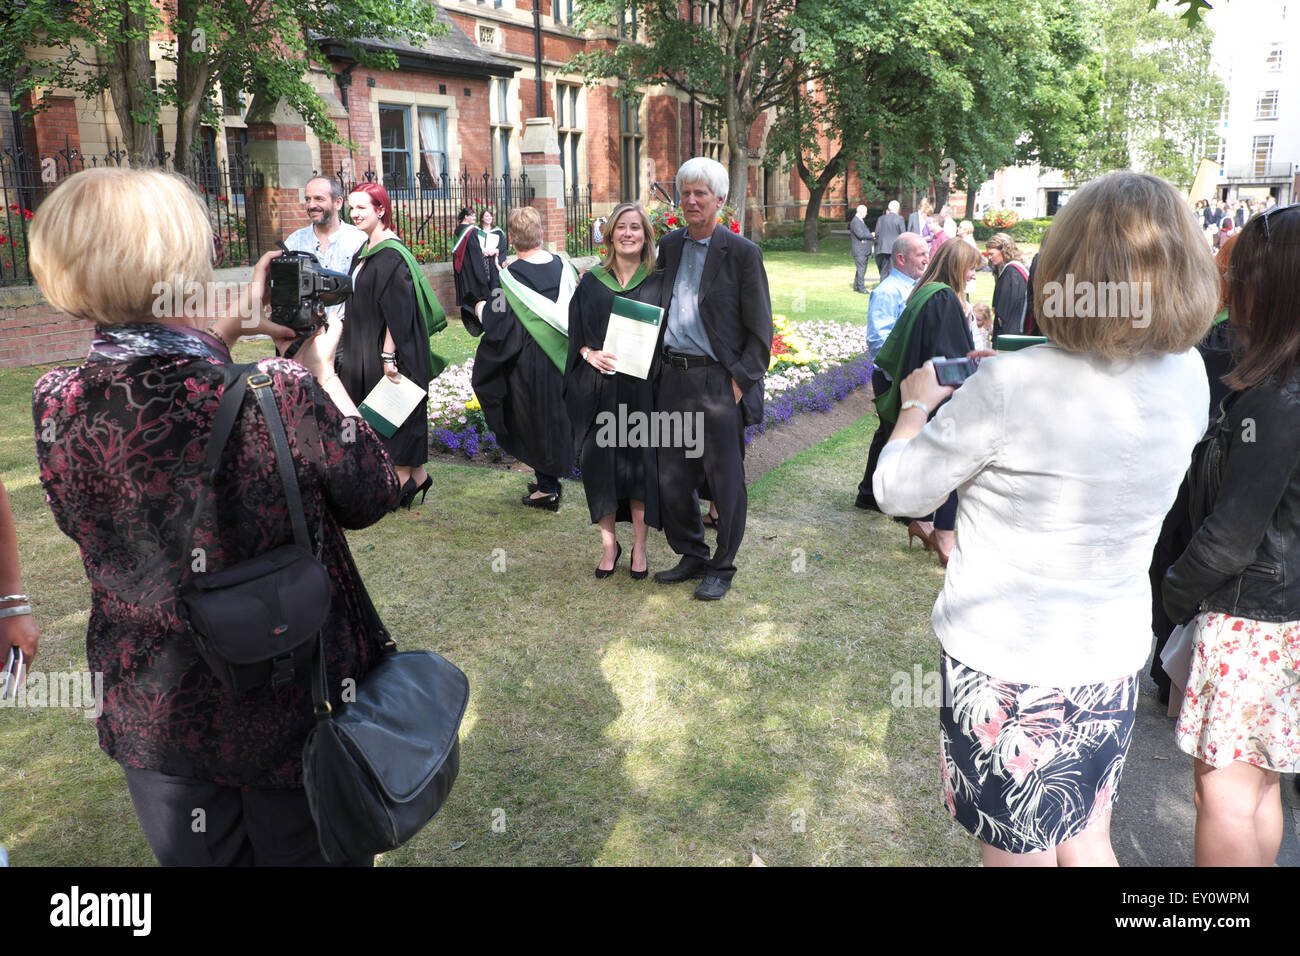 Student Graduation Day at University of Leeds graduate poses for photographs with family July 2015 UK Stock Photo